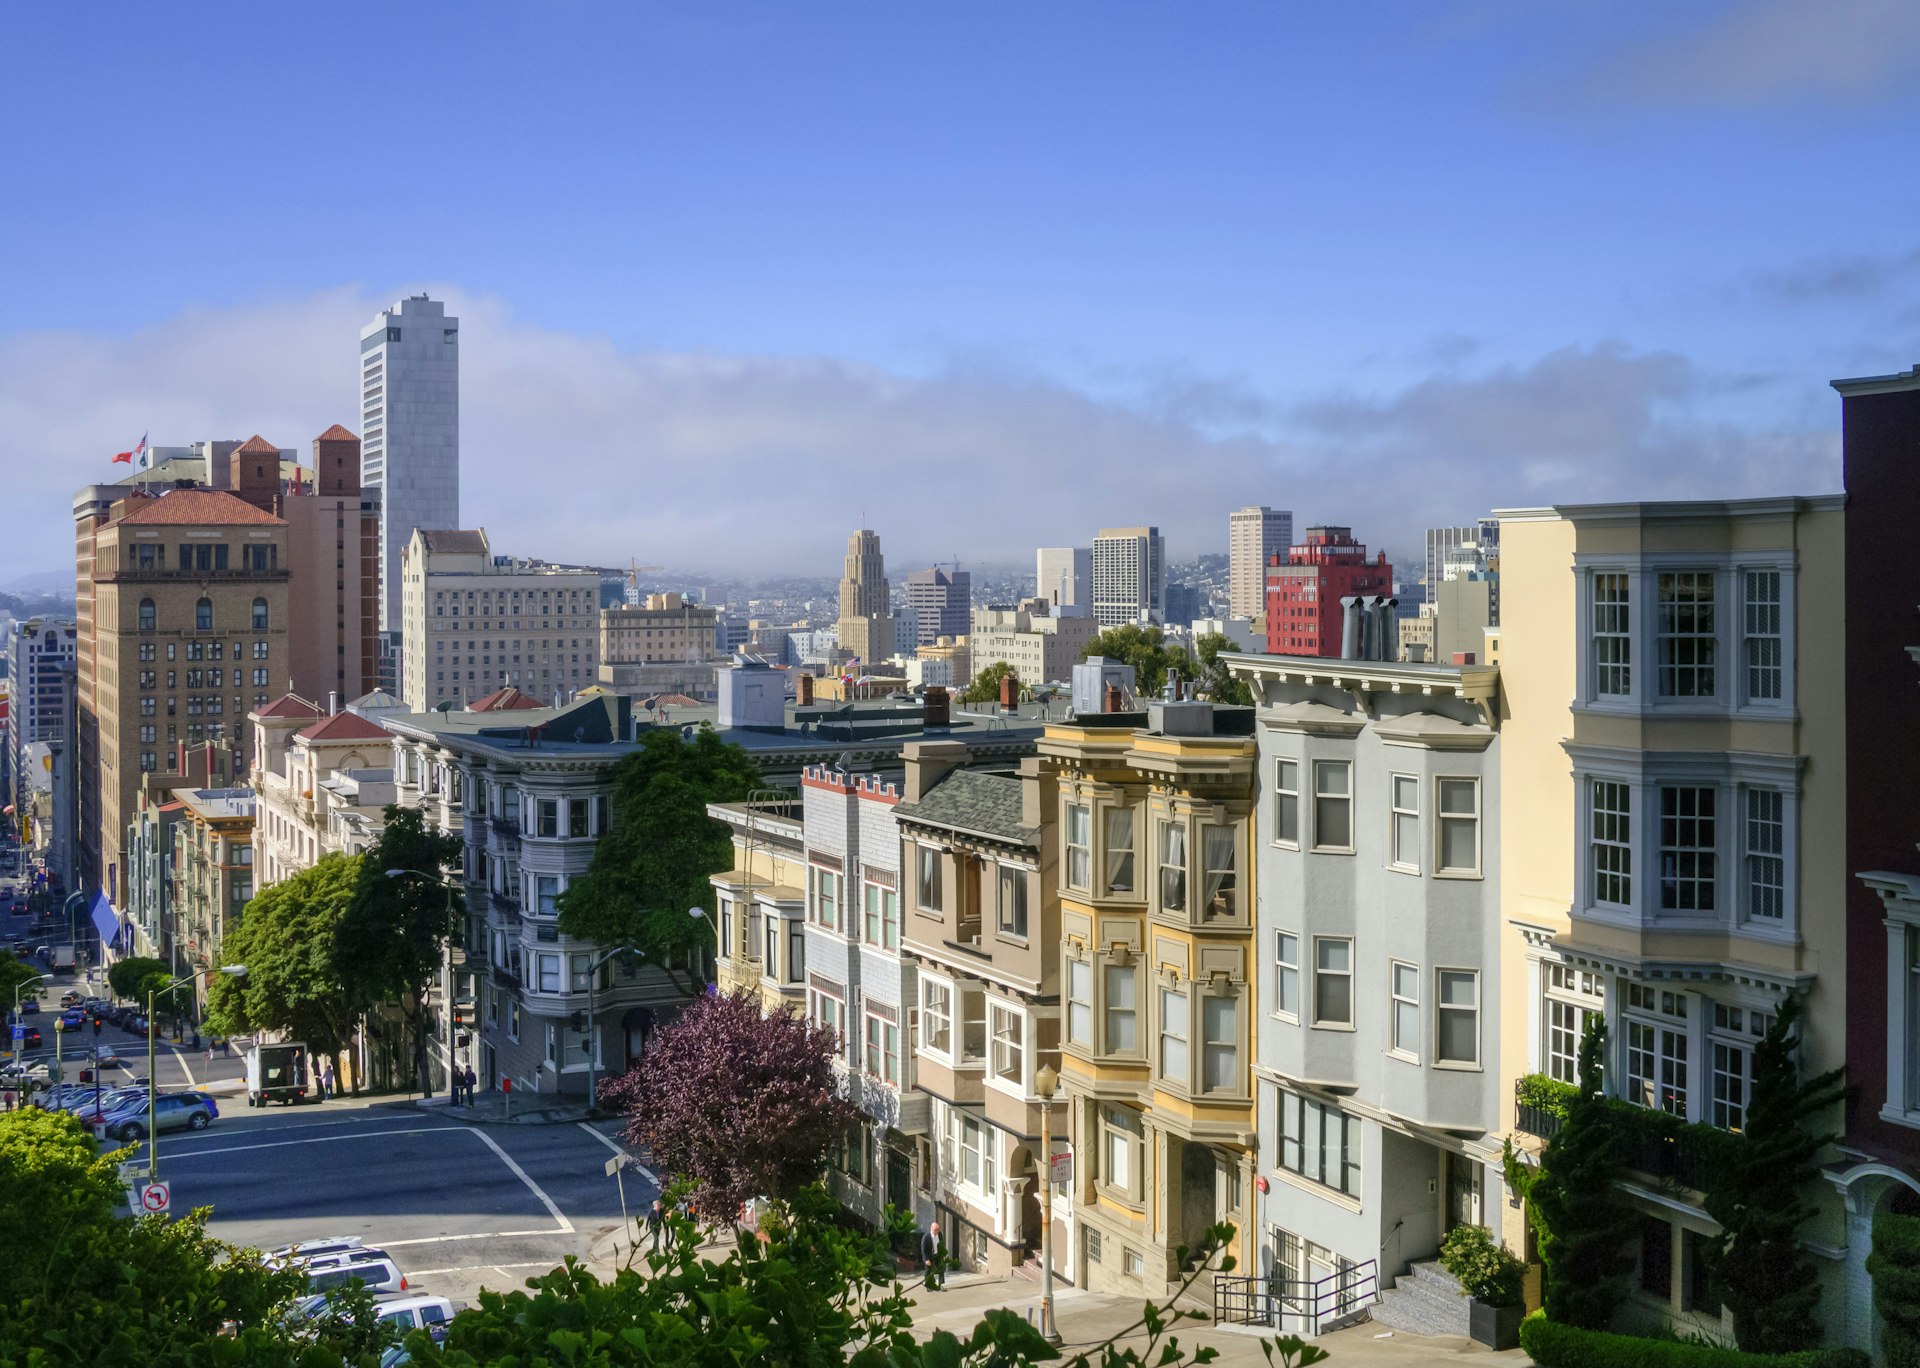 View of San Francisco from the Nob Hill neighborhood